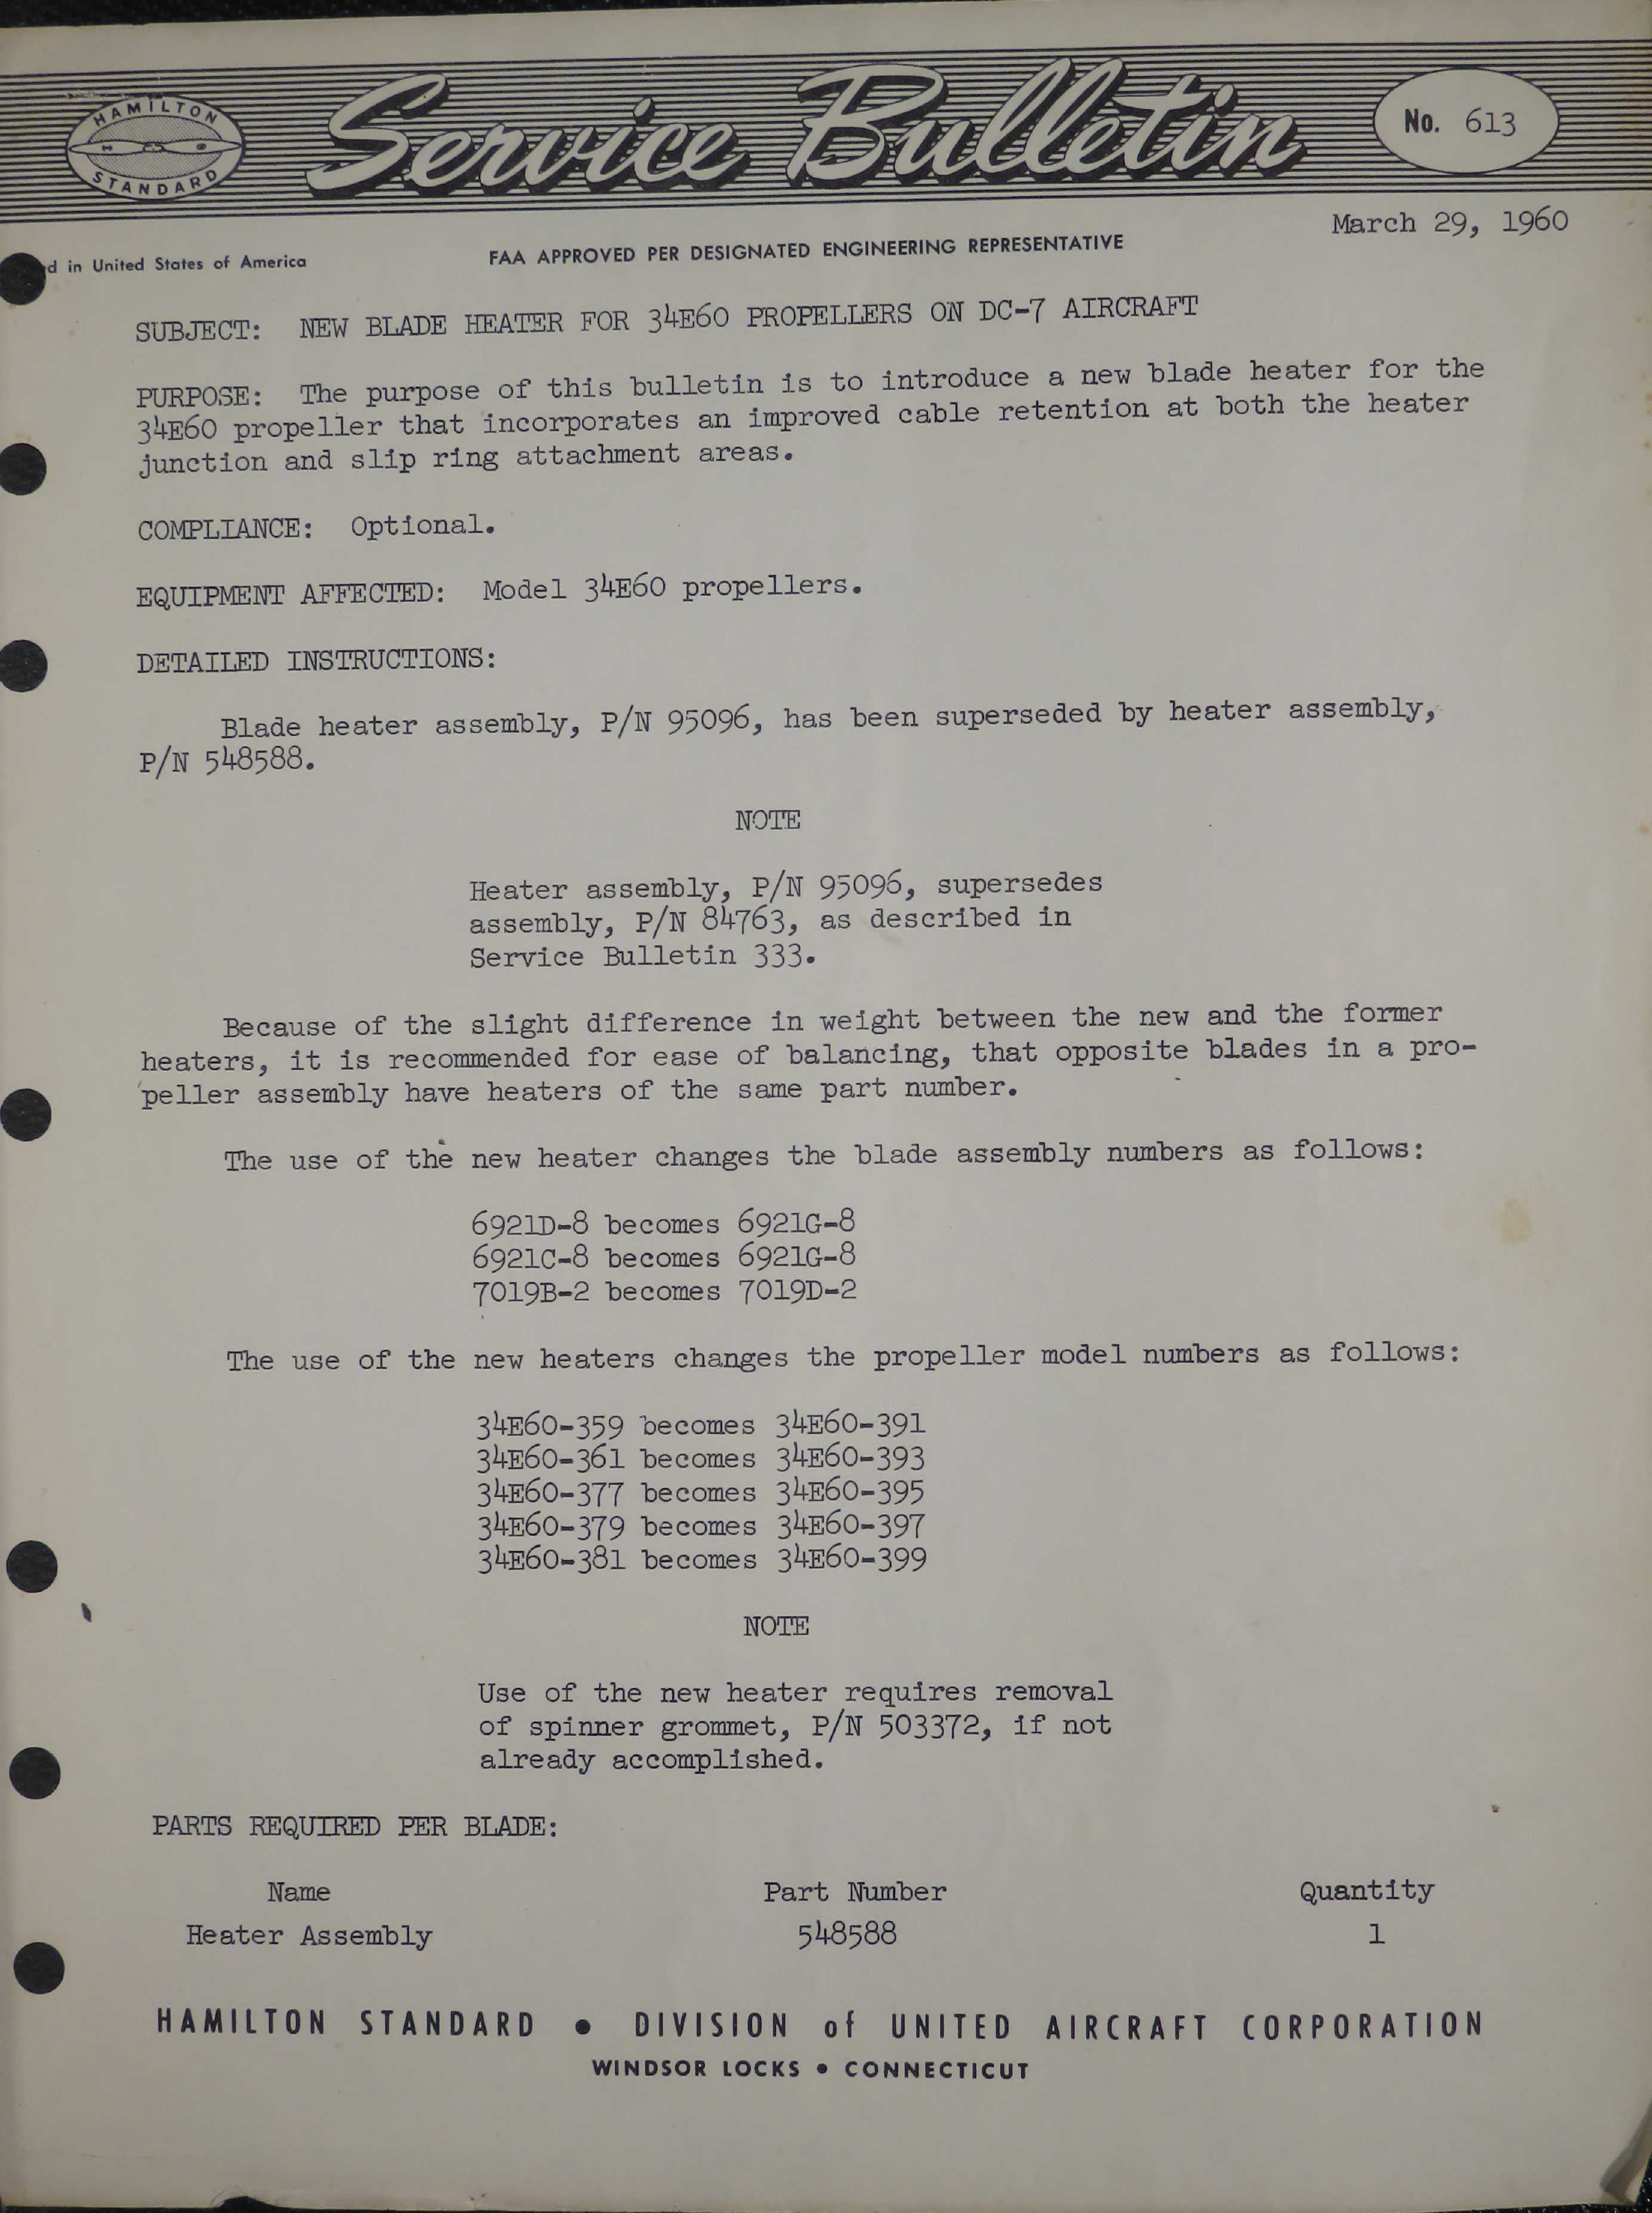 Sample page 1 from AirCorps Library document: New Blade Heater for 34E60 Propellers on DC-7 Aircraft